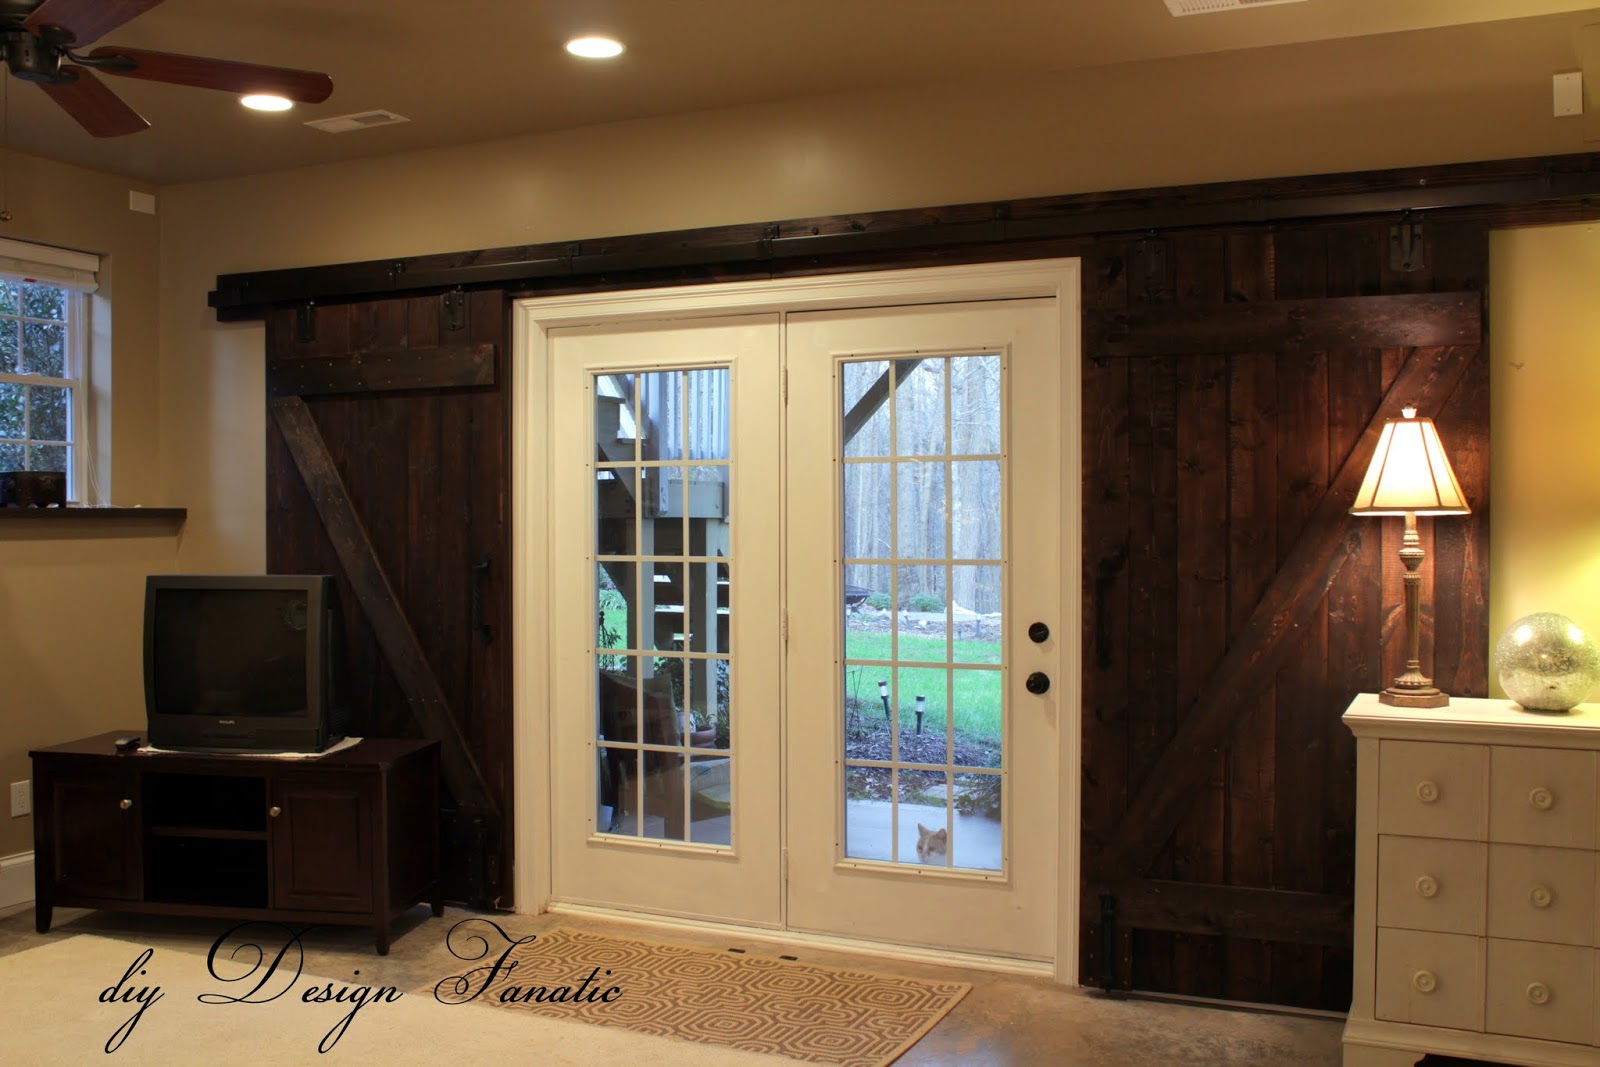 Diy Design Fanatic Barn Doors Completely Finished